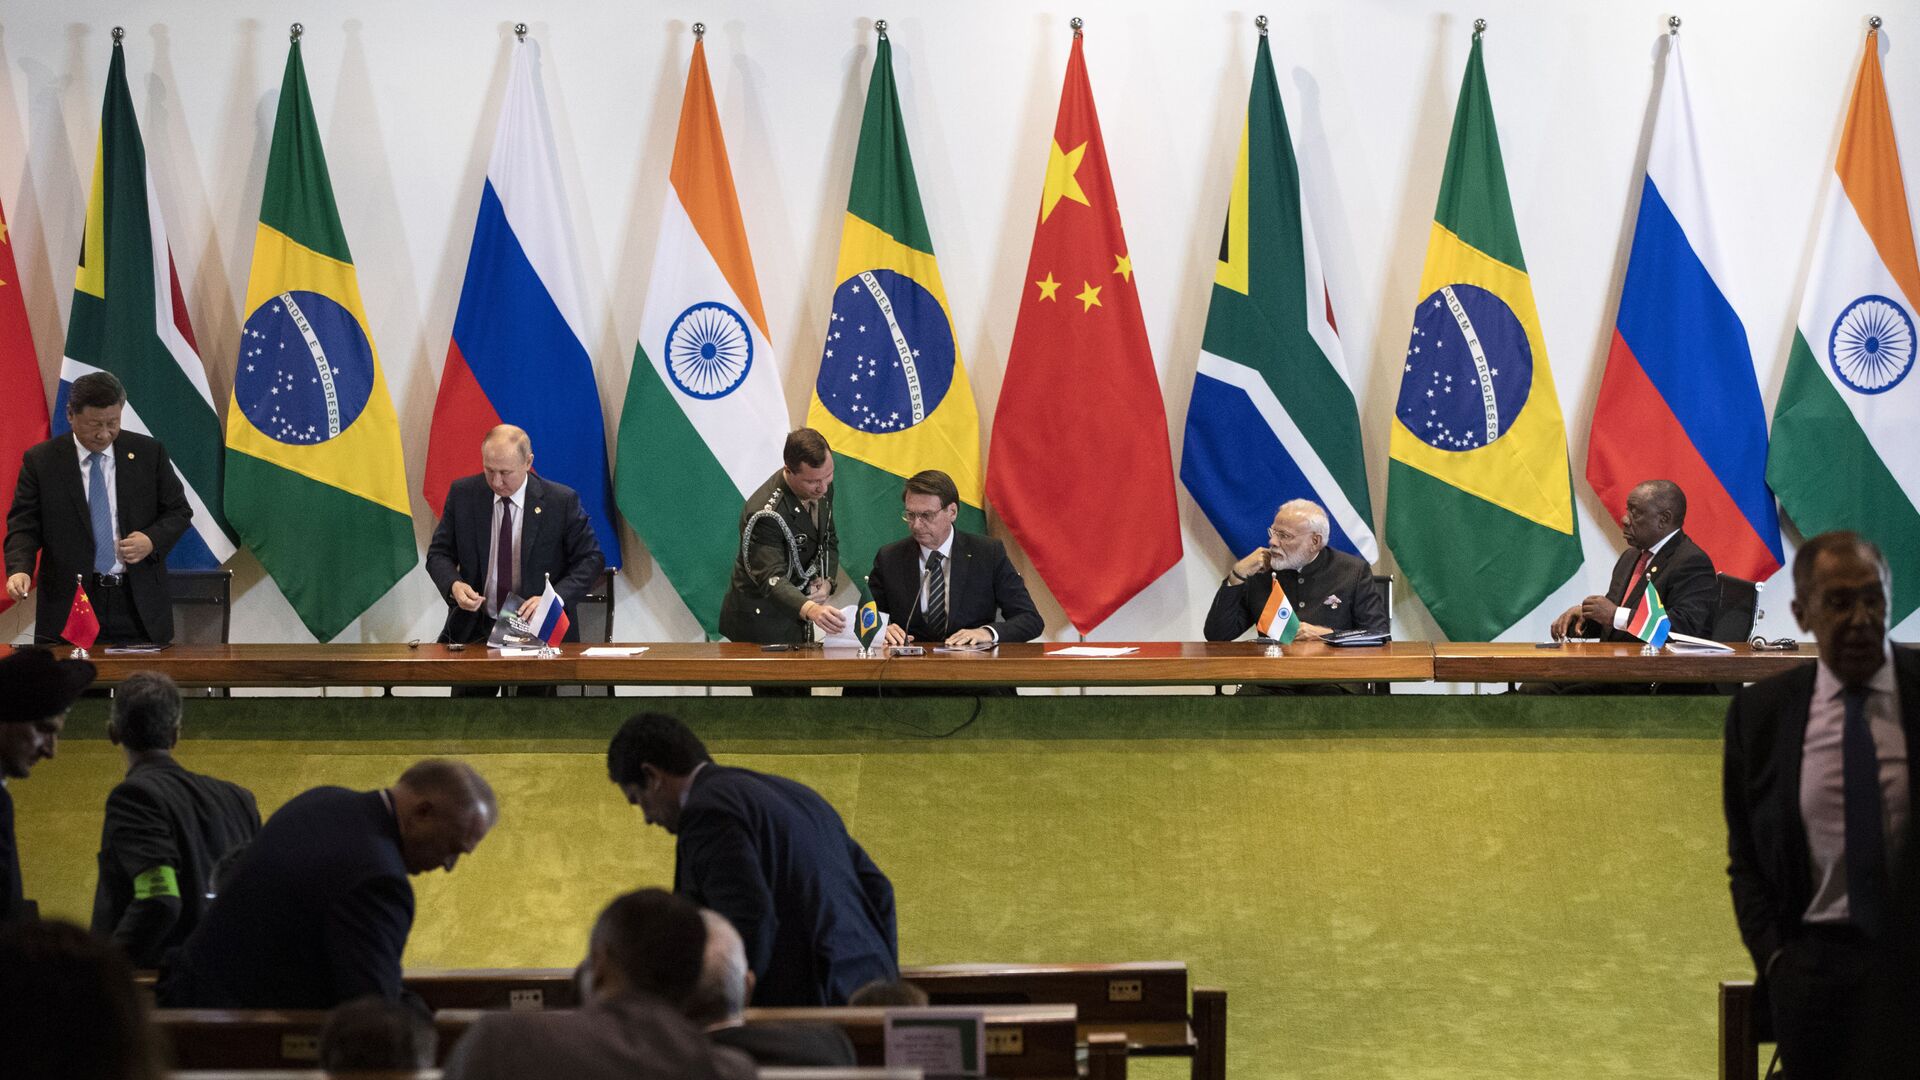 China's President Xi Jinping, left, Russia's President Vladimir Putin, second from left, Brazil's President Jair Bolsonaro, center, India's Prime Minister Narendra Modi, second from right, and South Africa's President Cyril Ramaphosa leave after a meeting with members of the Business Council and management of the New Development Bank during the BRICS emerging economies at the Itamaraty Palace in Brasilia, Brazil, Thursday, Nov. 14, 2019. - Sputnik International, 1920, 23.12.2022